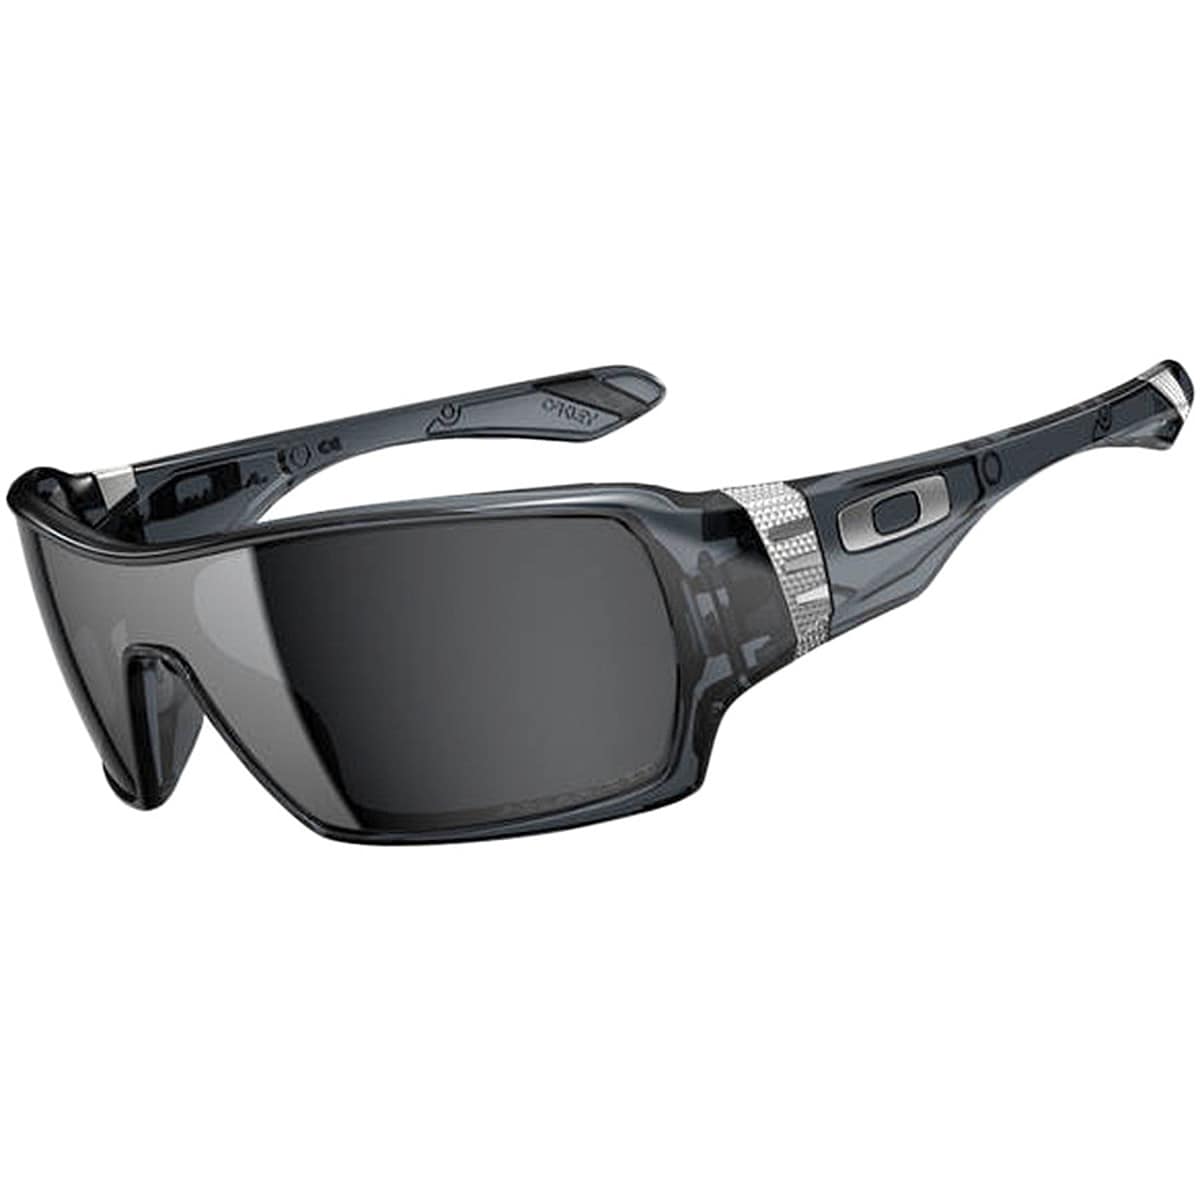 Oakley Offshoot Sunglasses - Polarized - Accessories